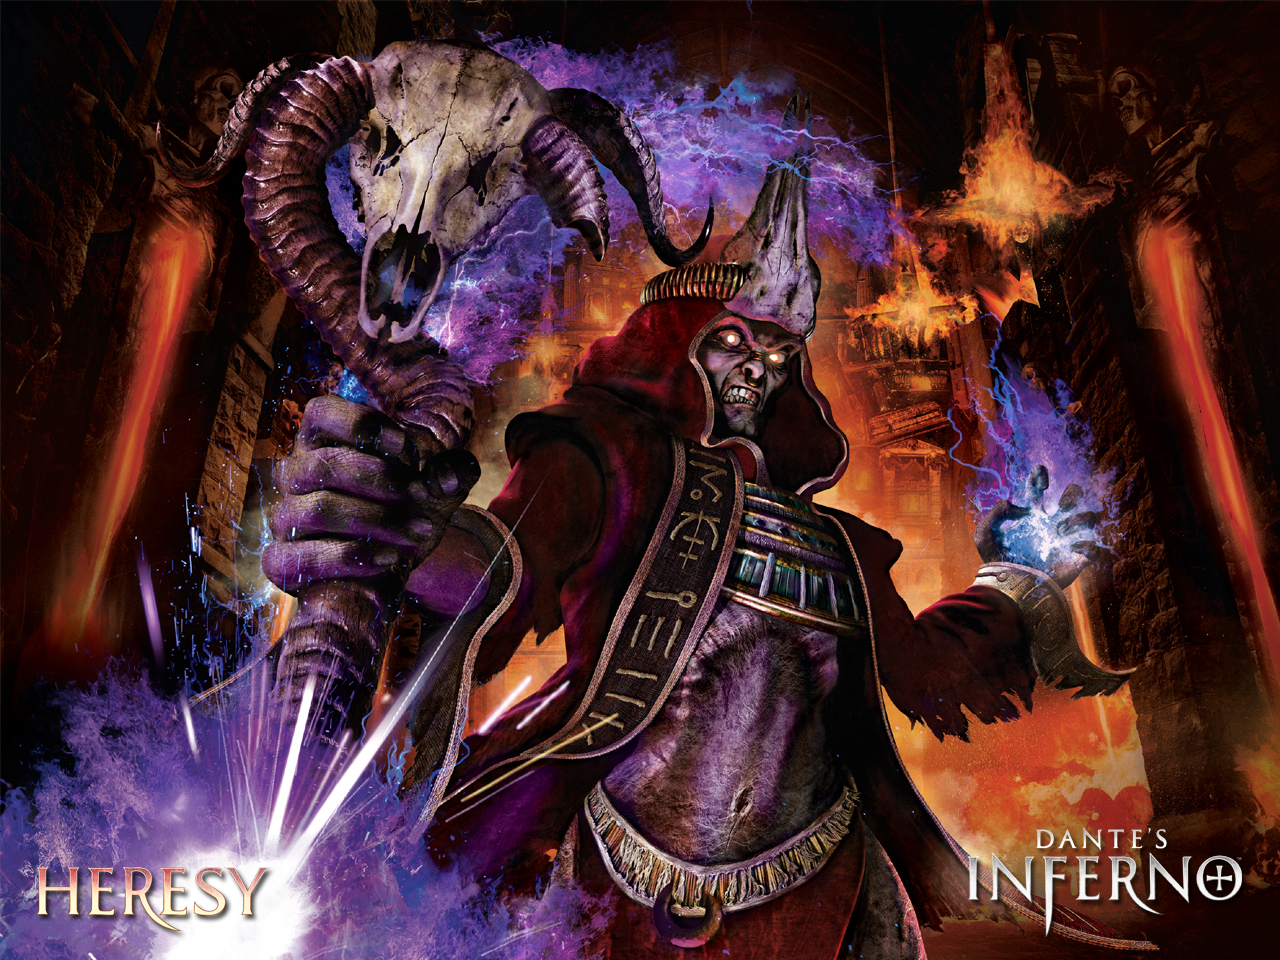 Third Circle of Hell in Inferno  Gluttony, Cerberus & Punishment